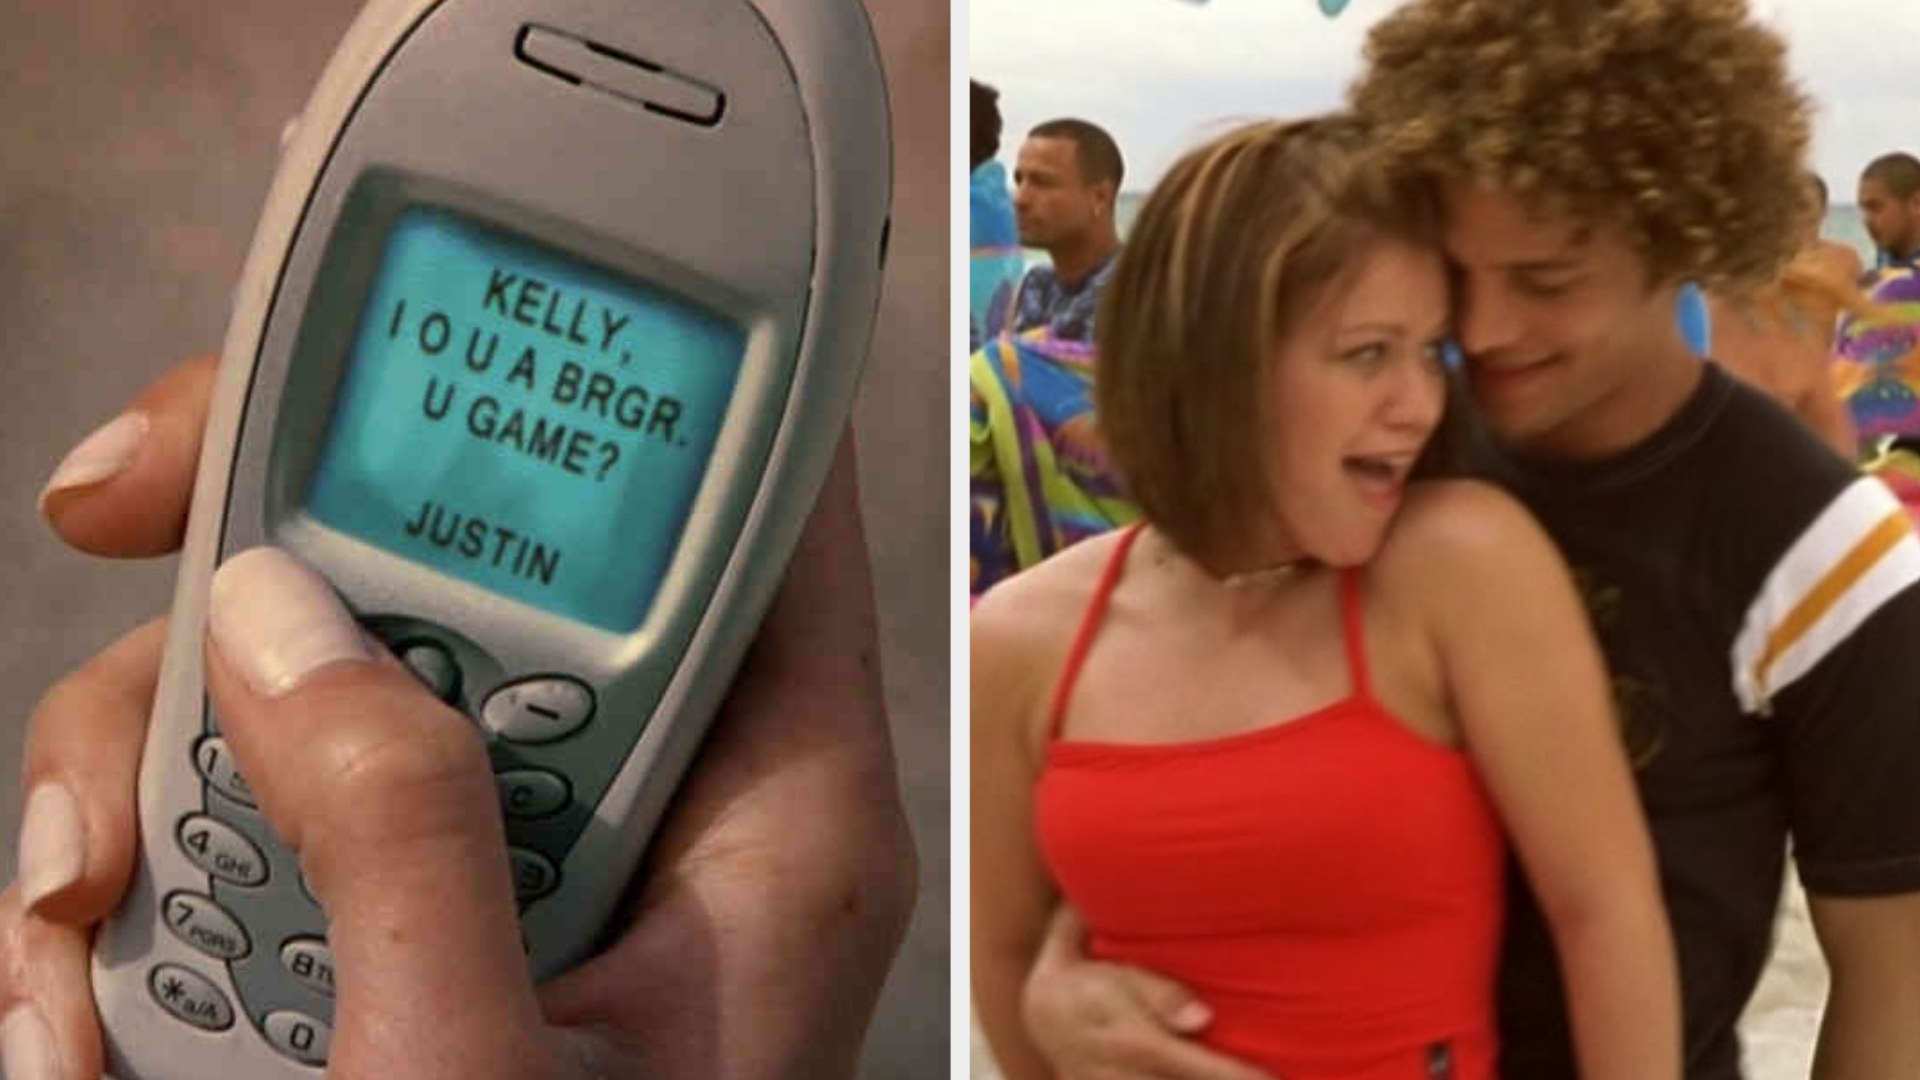 Justin texting Kelly: &quot;Kelly, I O U a brger. U game?&quot; and Justin and Kelly dancing romantically on the beach